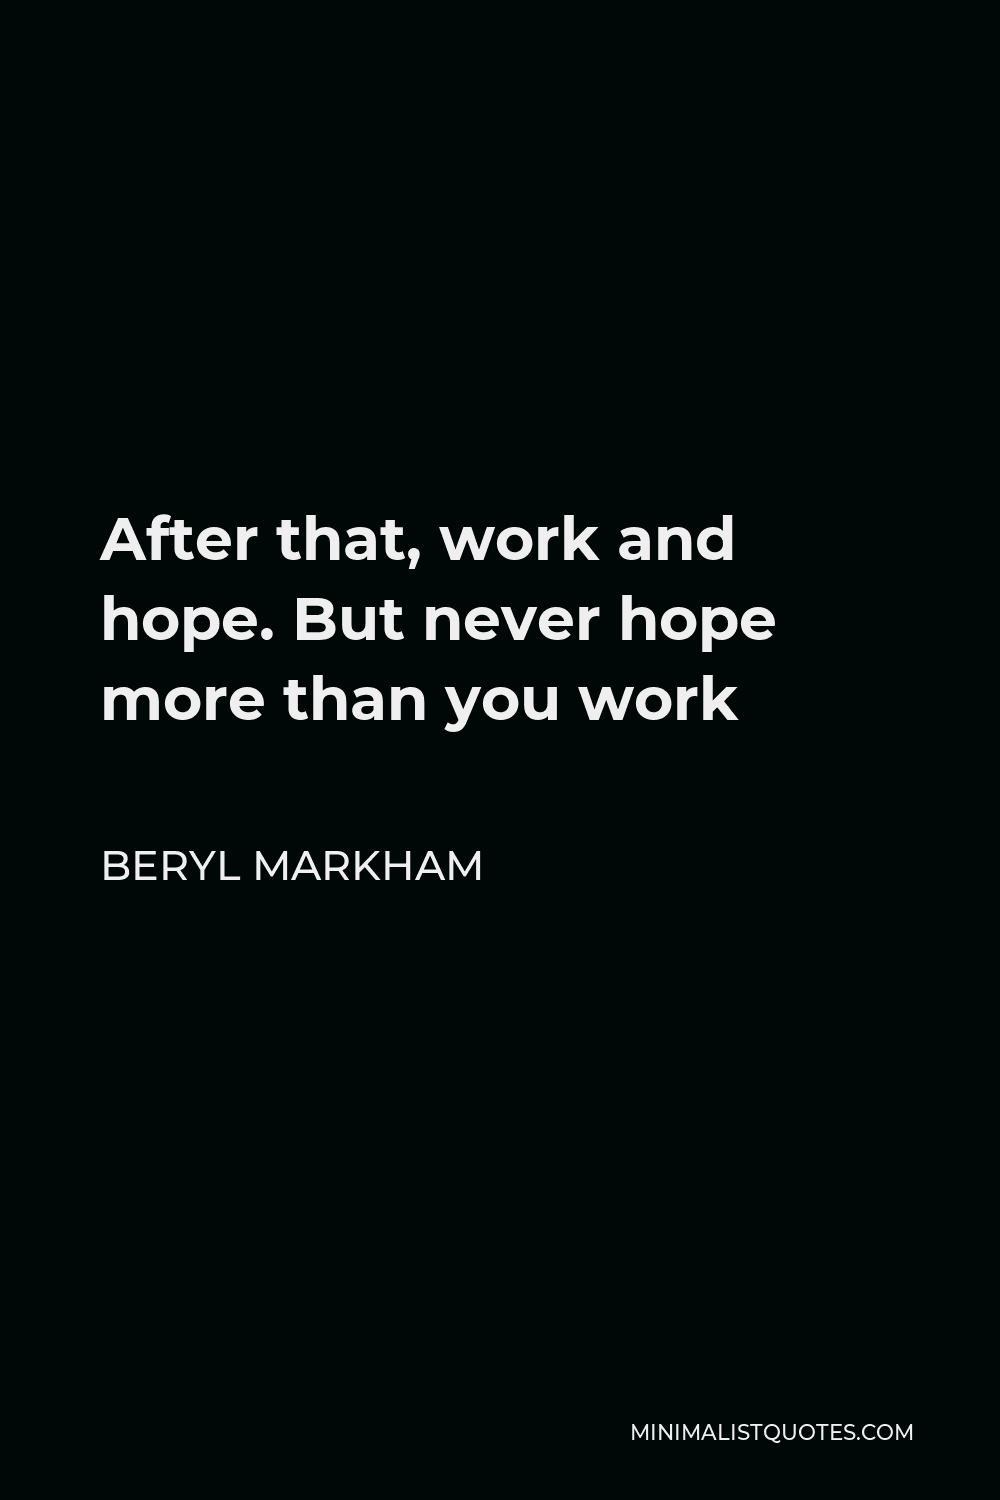 Beryl Markham Quote - After that, work and hope. But never hope more than you work